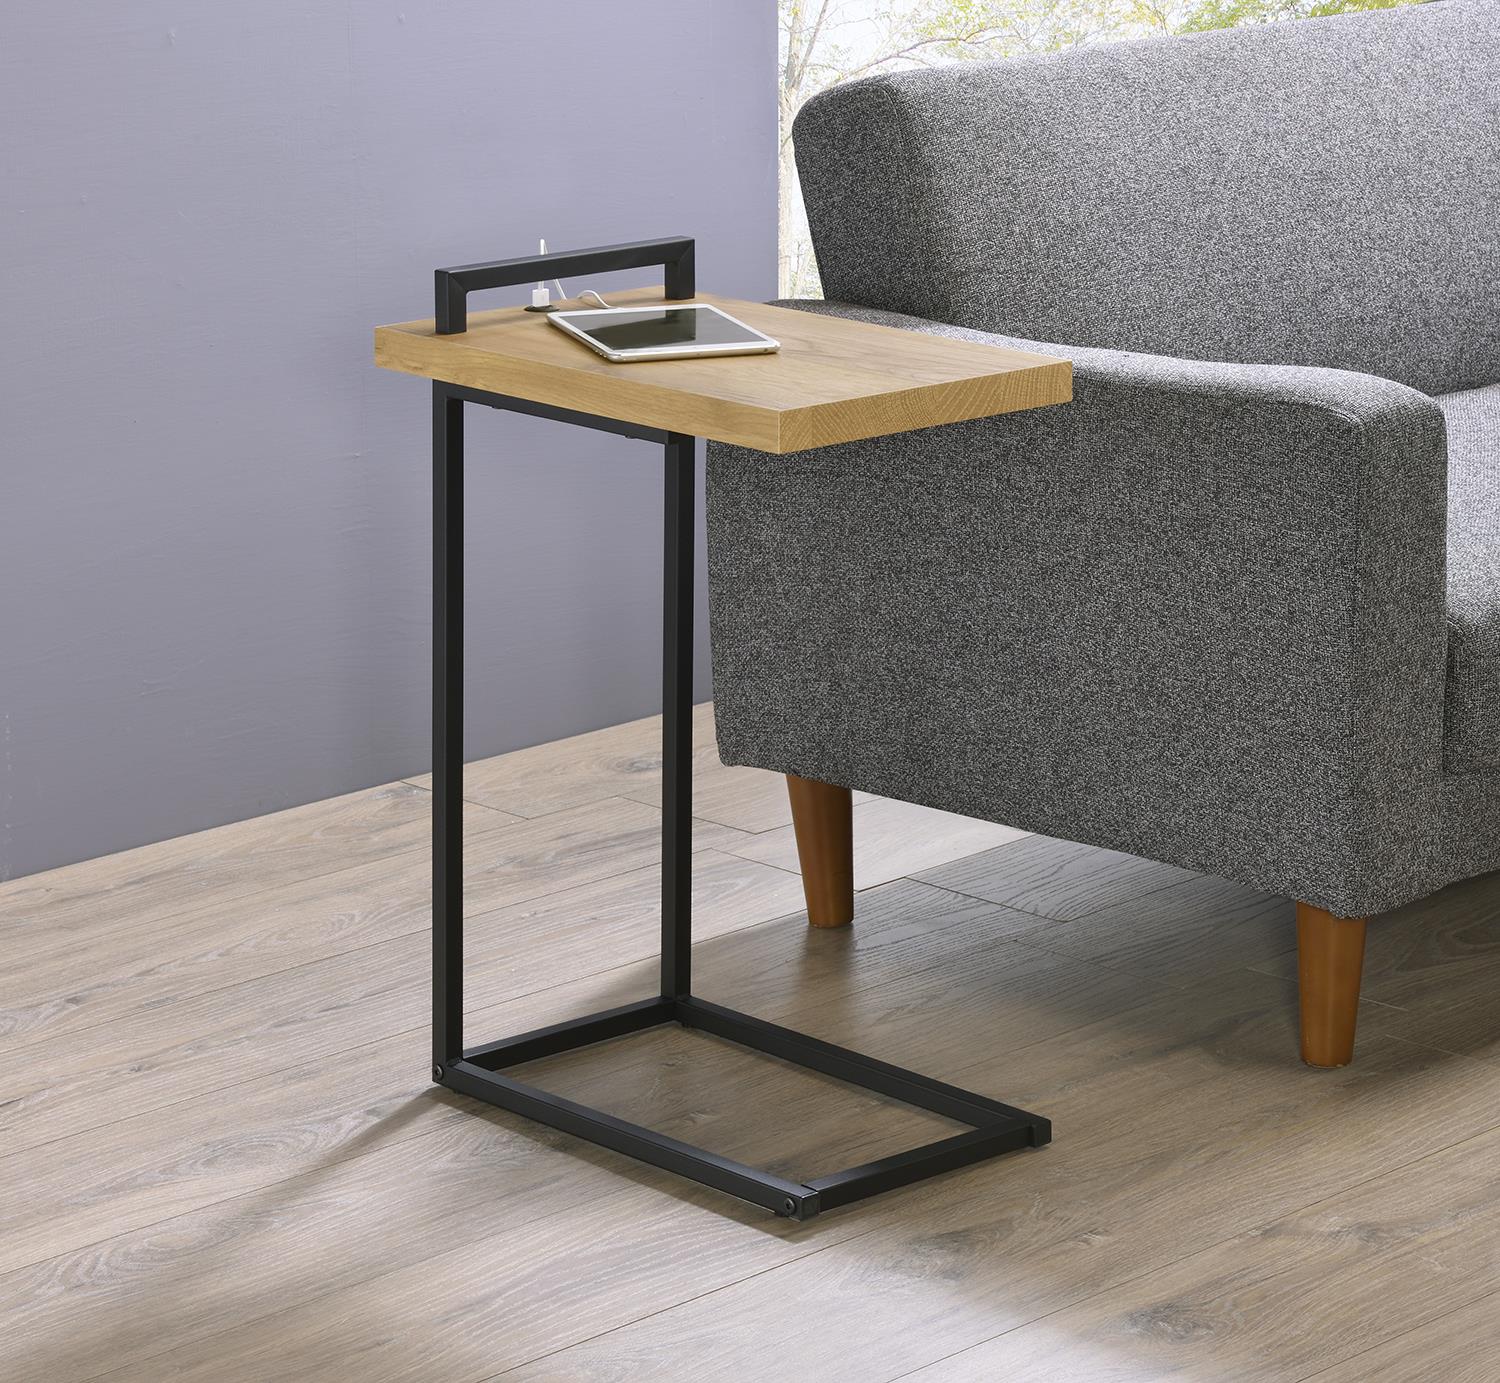 C-shaped Accent Table with USB Charging Port - What A Room